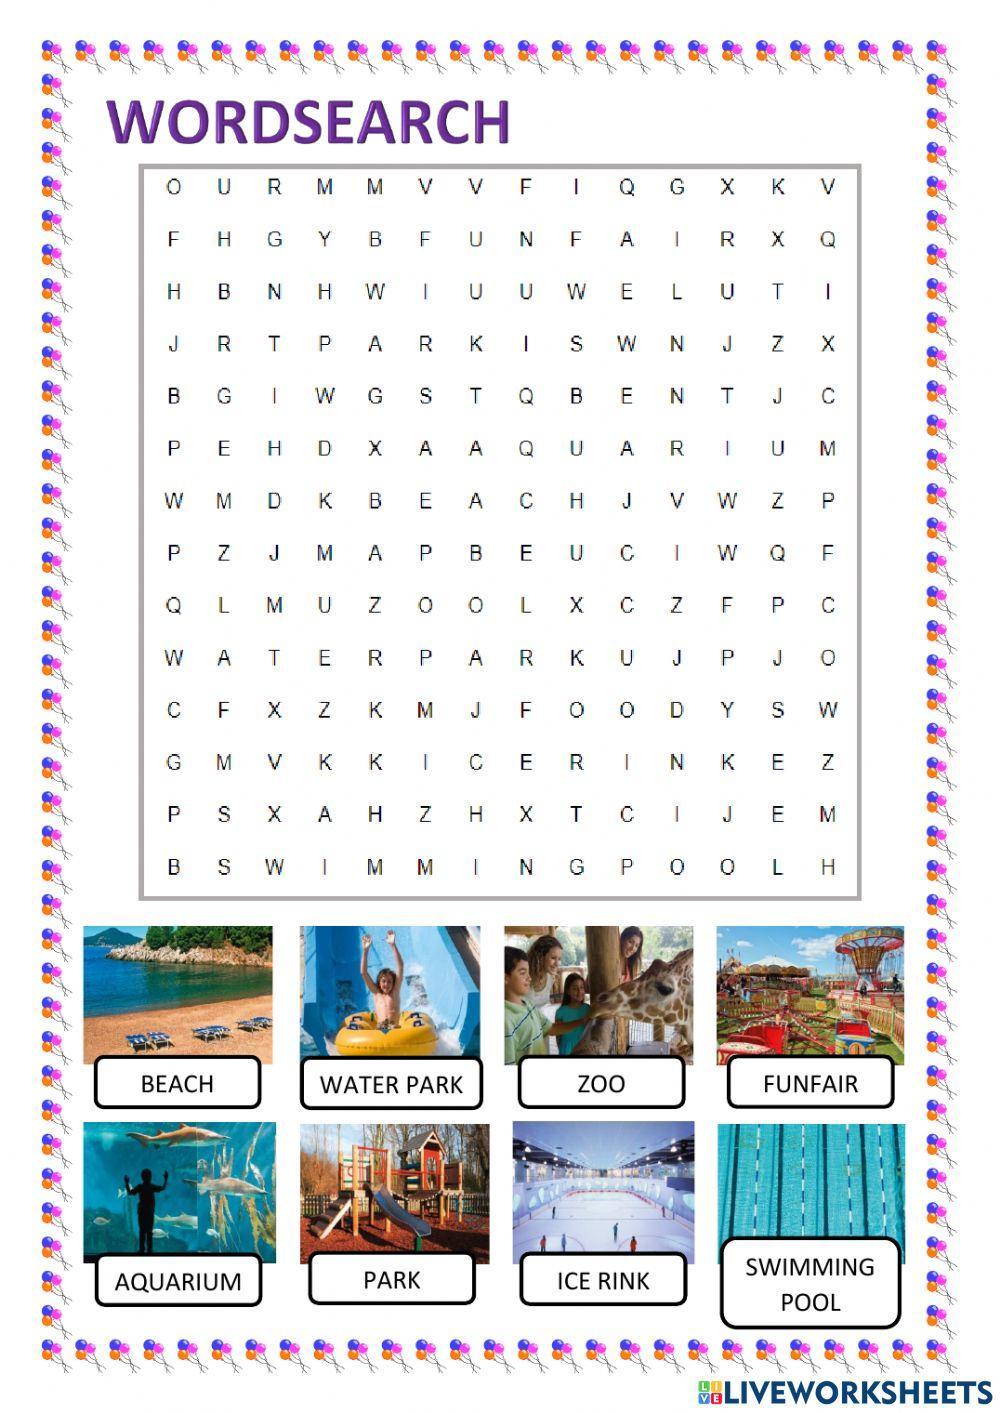 On holiday wordsearch